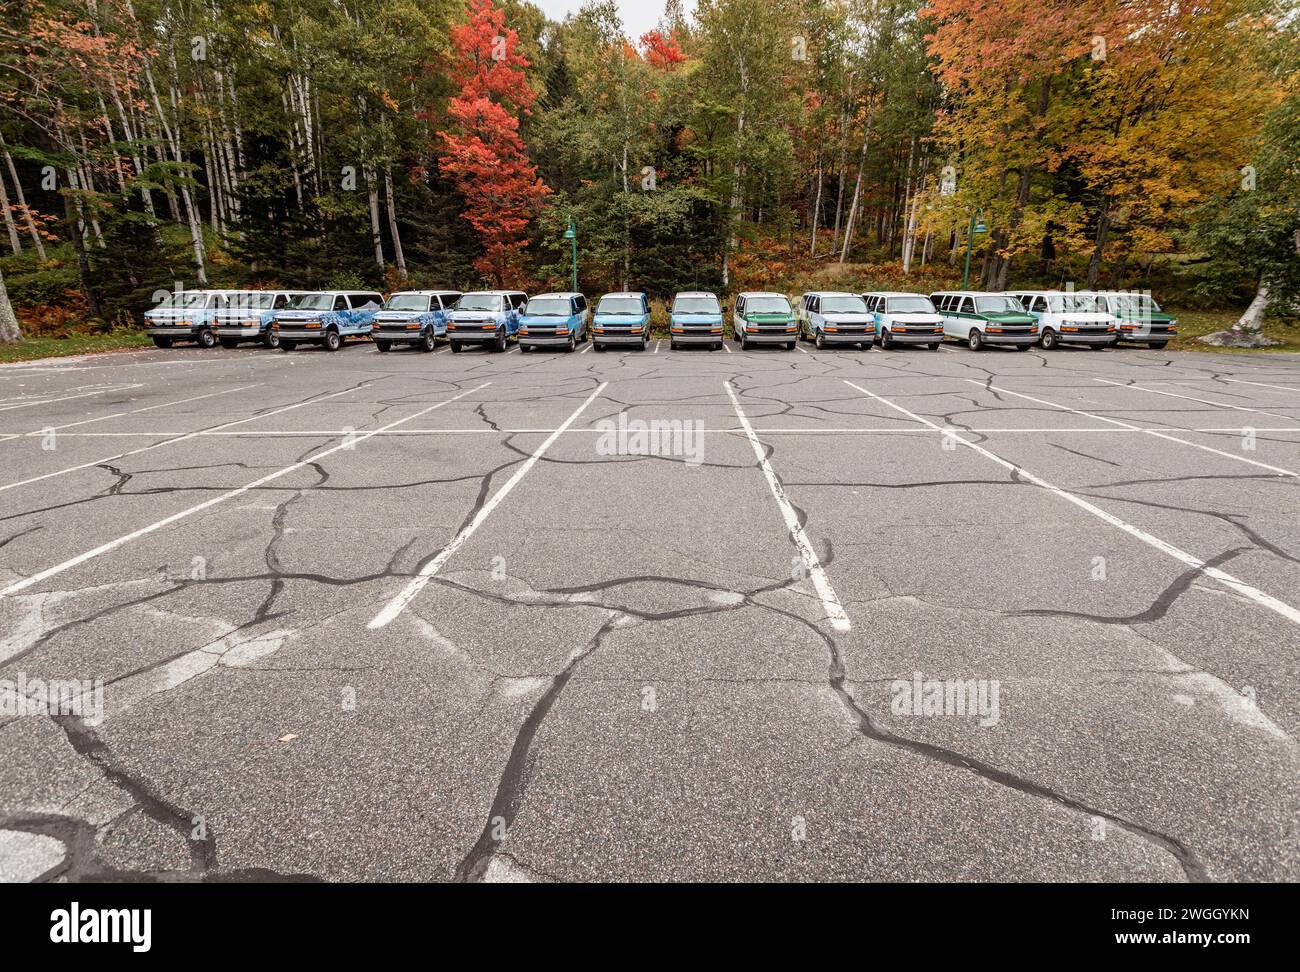 Large parking lot filled with neat row of vans in a line. Stock Photo